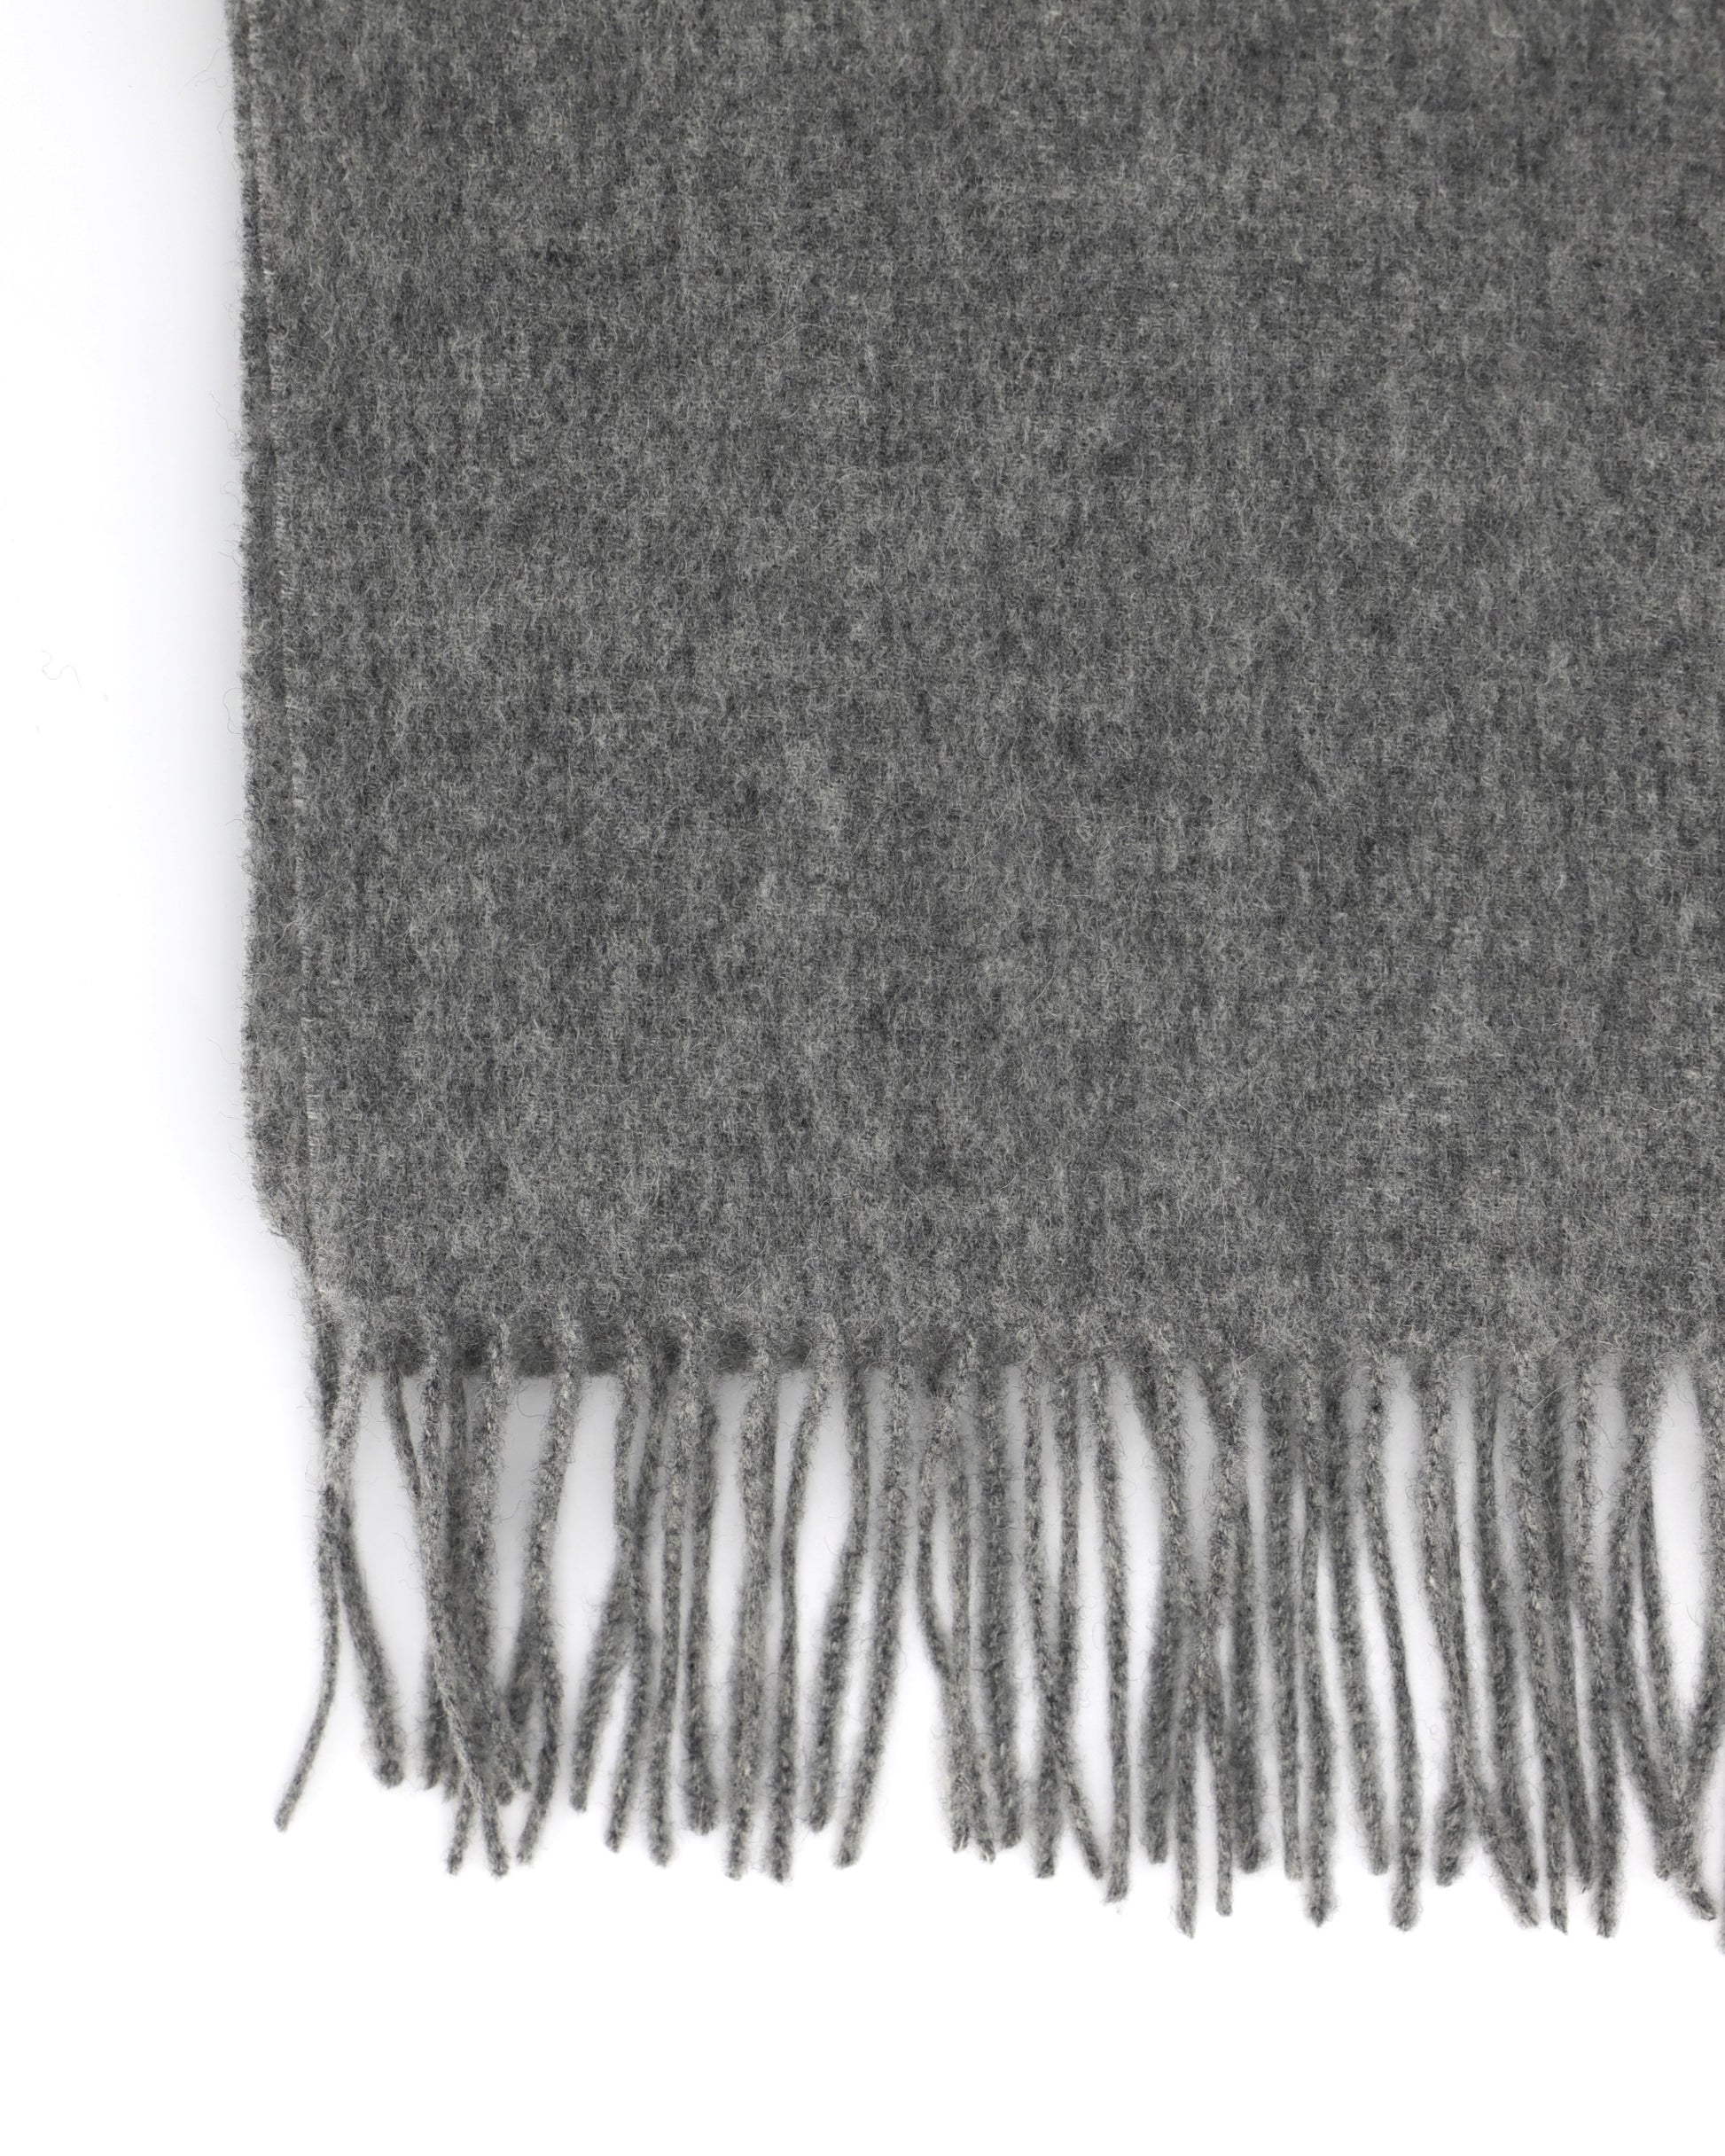 This Scarf is a finest 100% natural merino wool scarf from Villanelle. A luxurious and classic accessory for women and for men and made made from the softest natural merino wool in medium grey color for extreme comfort, warmth, a great look and feeling. This product is sourced in Italy and manufactured in Poland.